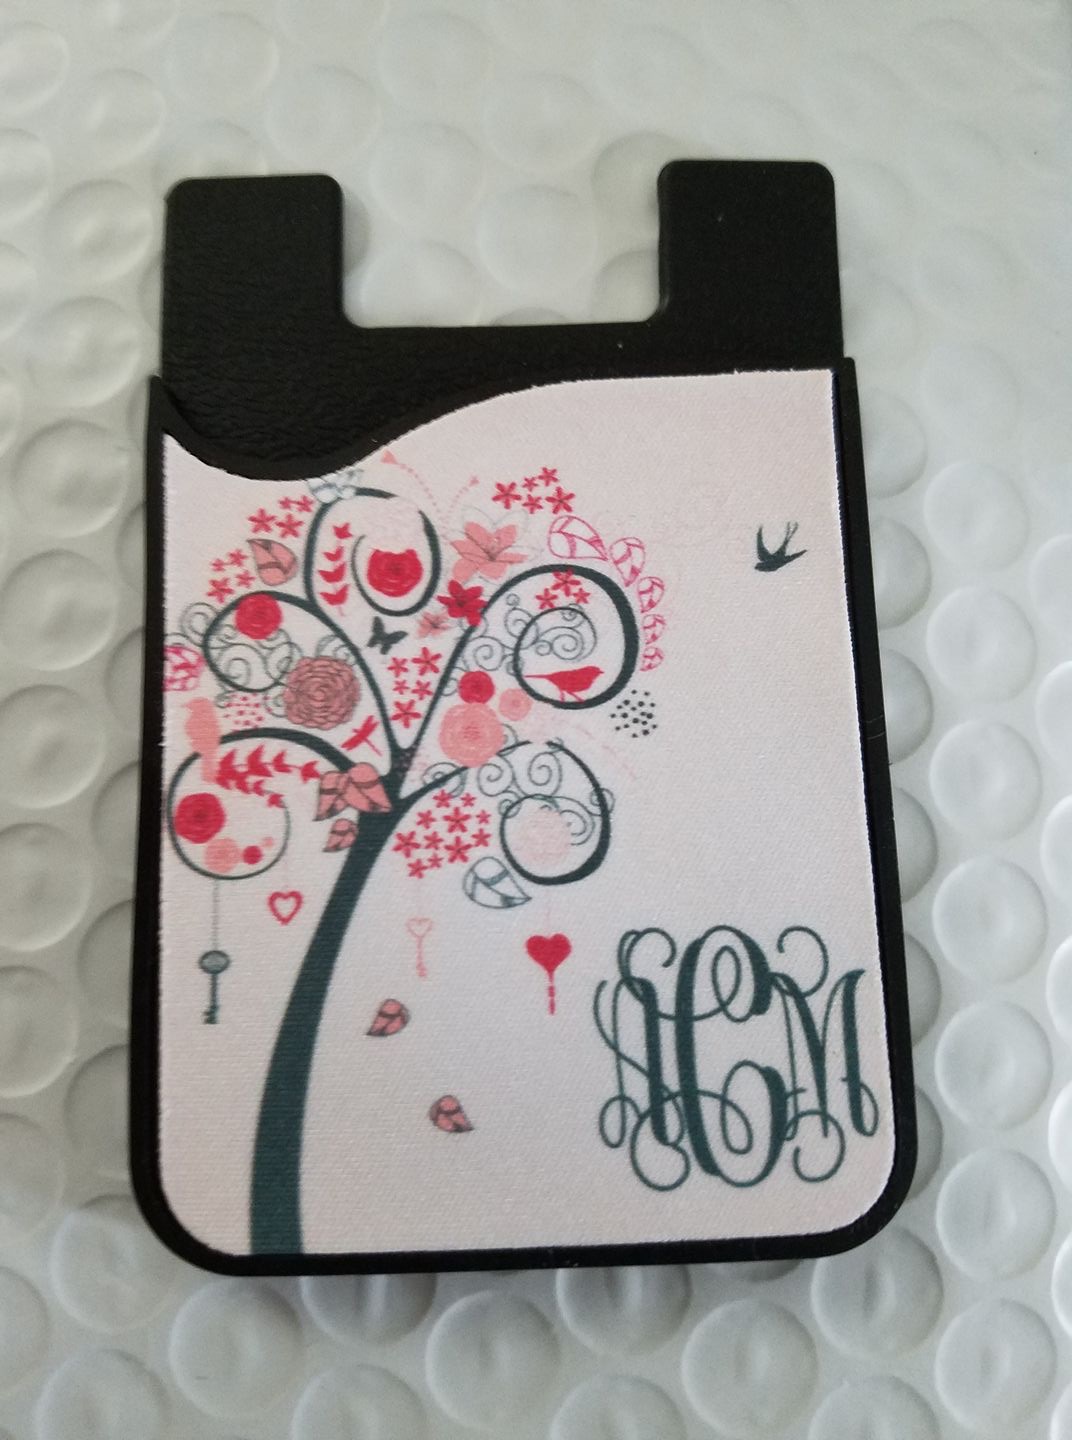 Phone Caddy made with sublimation printing